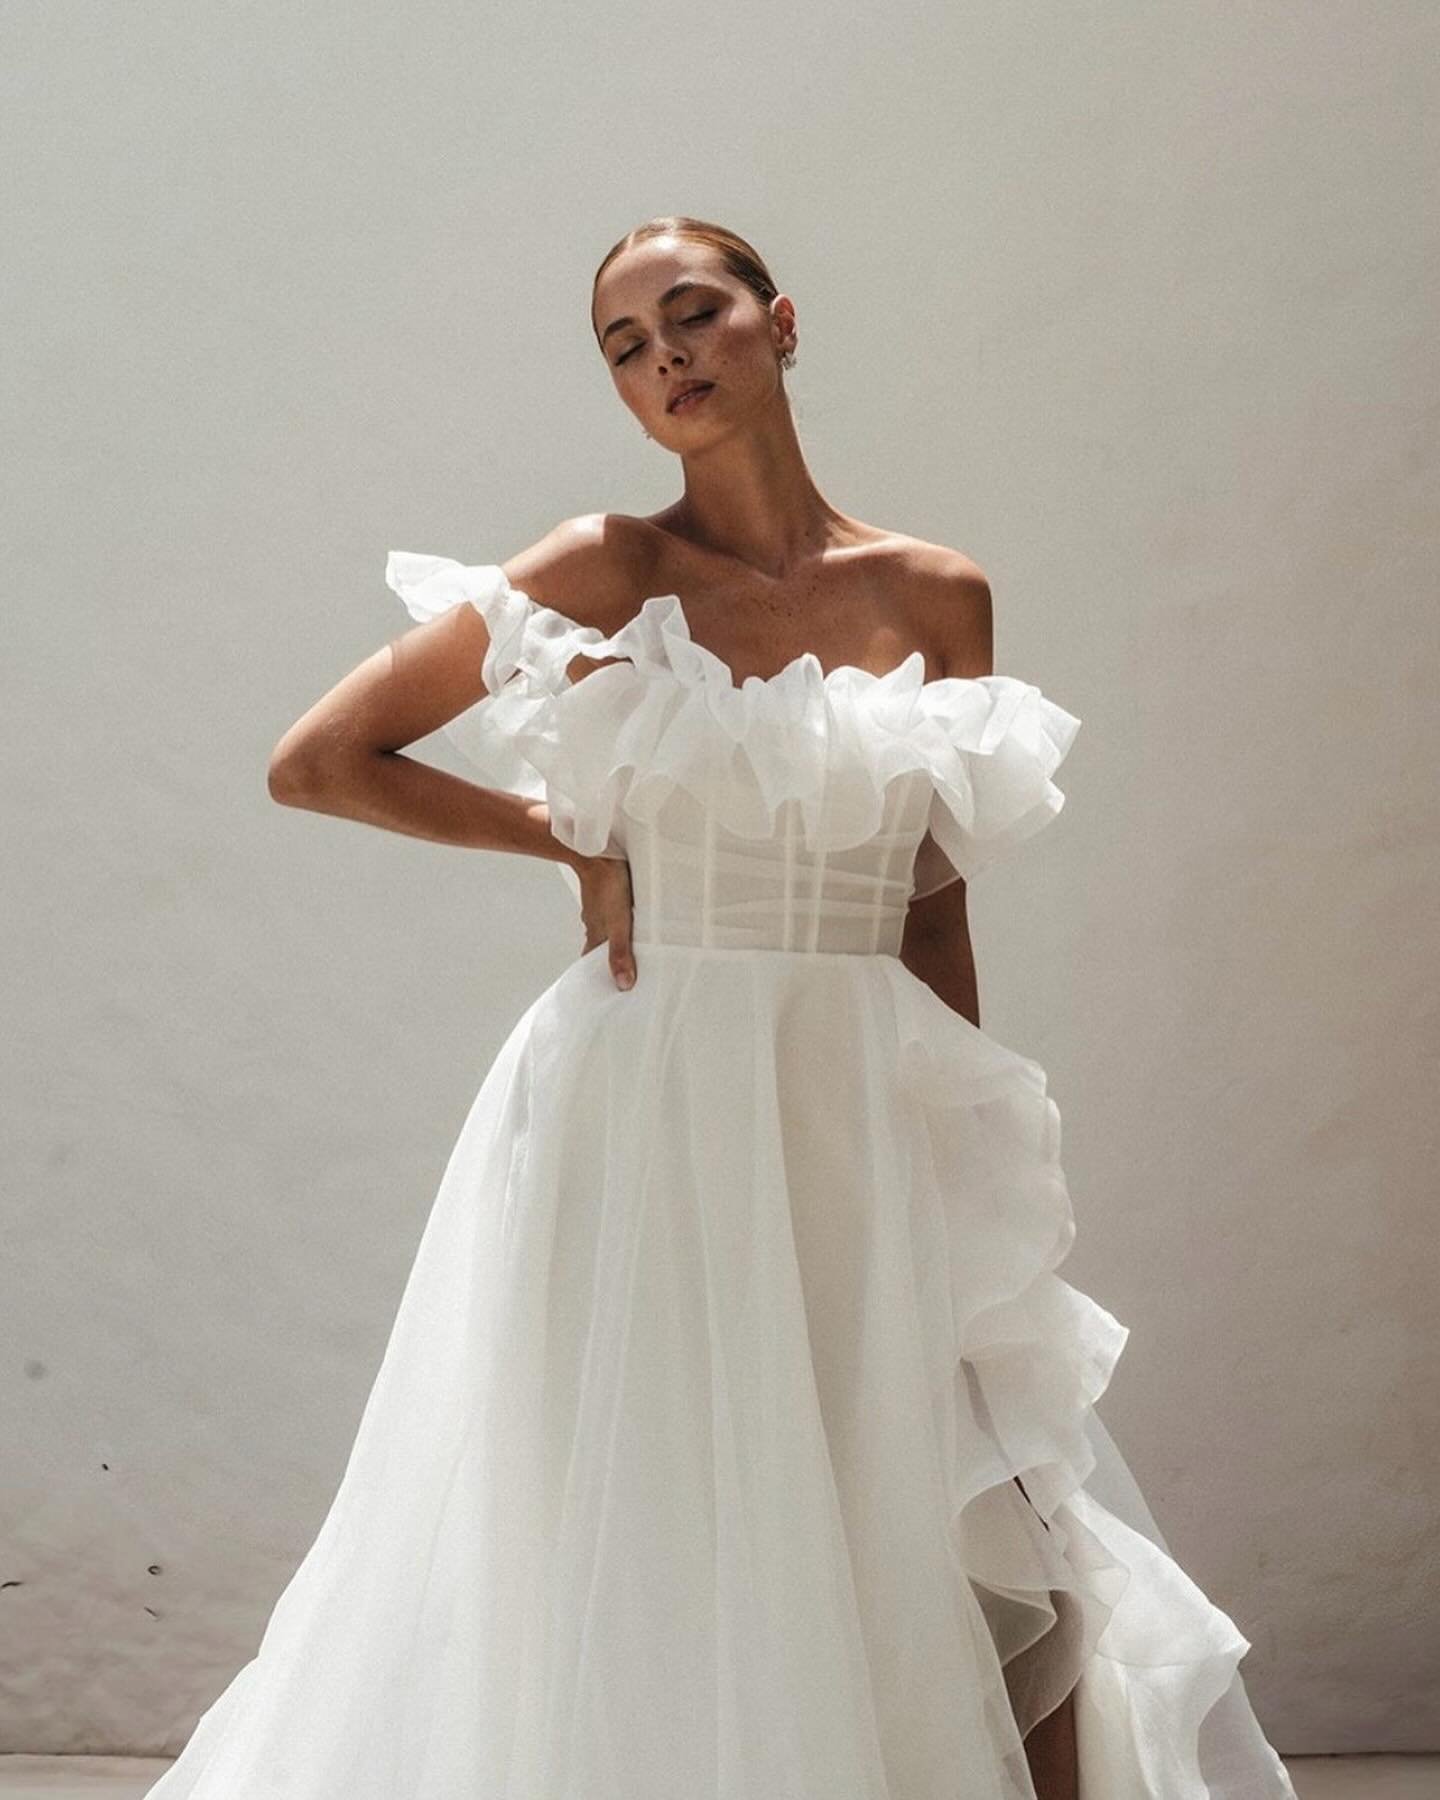 Introducing White Carnation, our newest @alenaleenabridal arrival ♡ 

There&rsquo;s absolutely nothing common about the White Carnation gown, only classic yet striking femininity. 

White Carnation has just landed in boutique and we are so ready for 